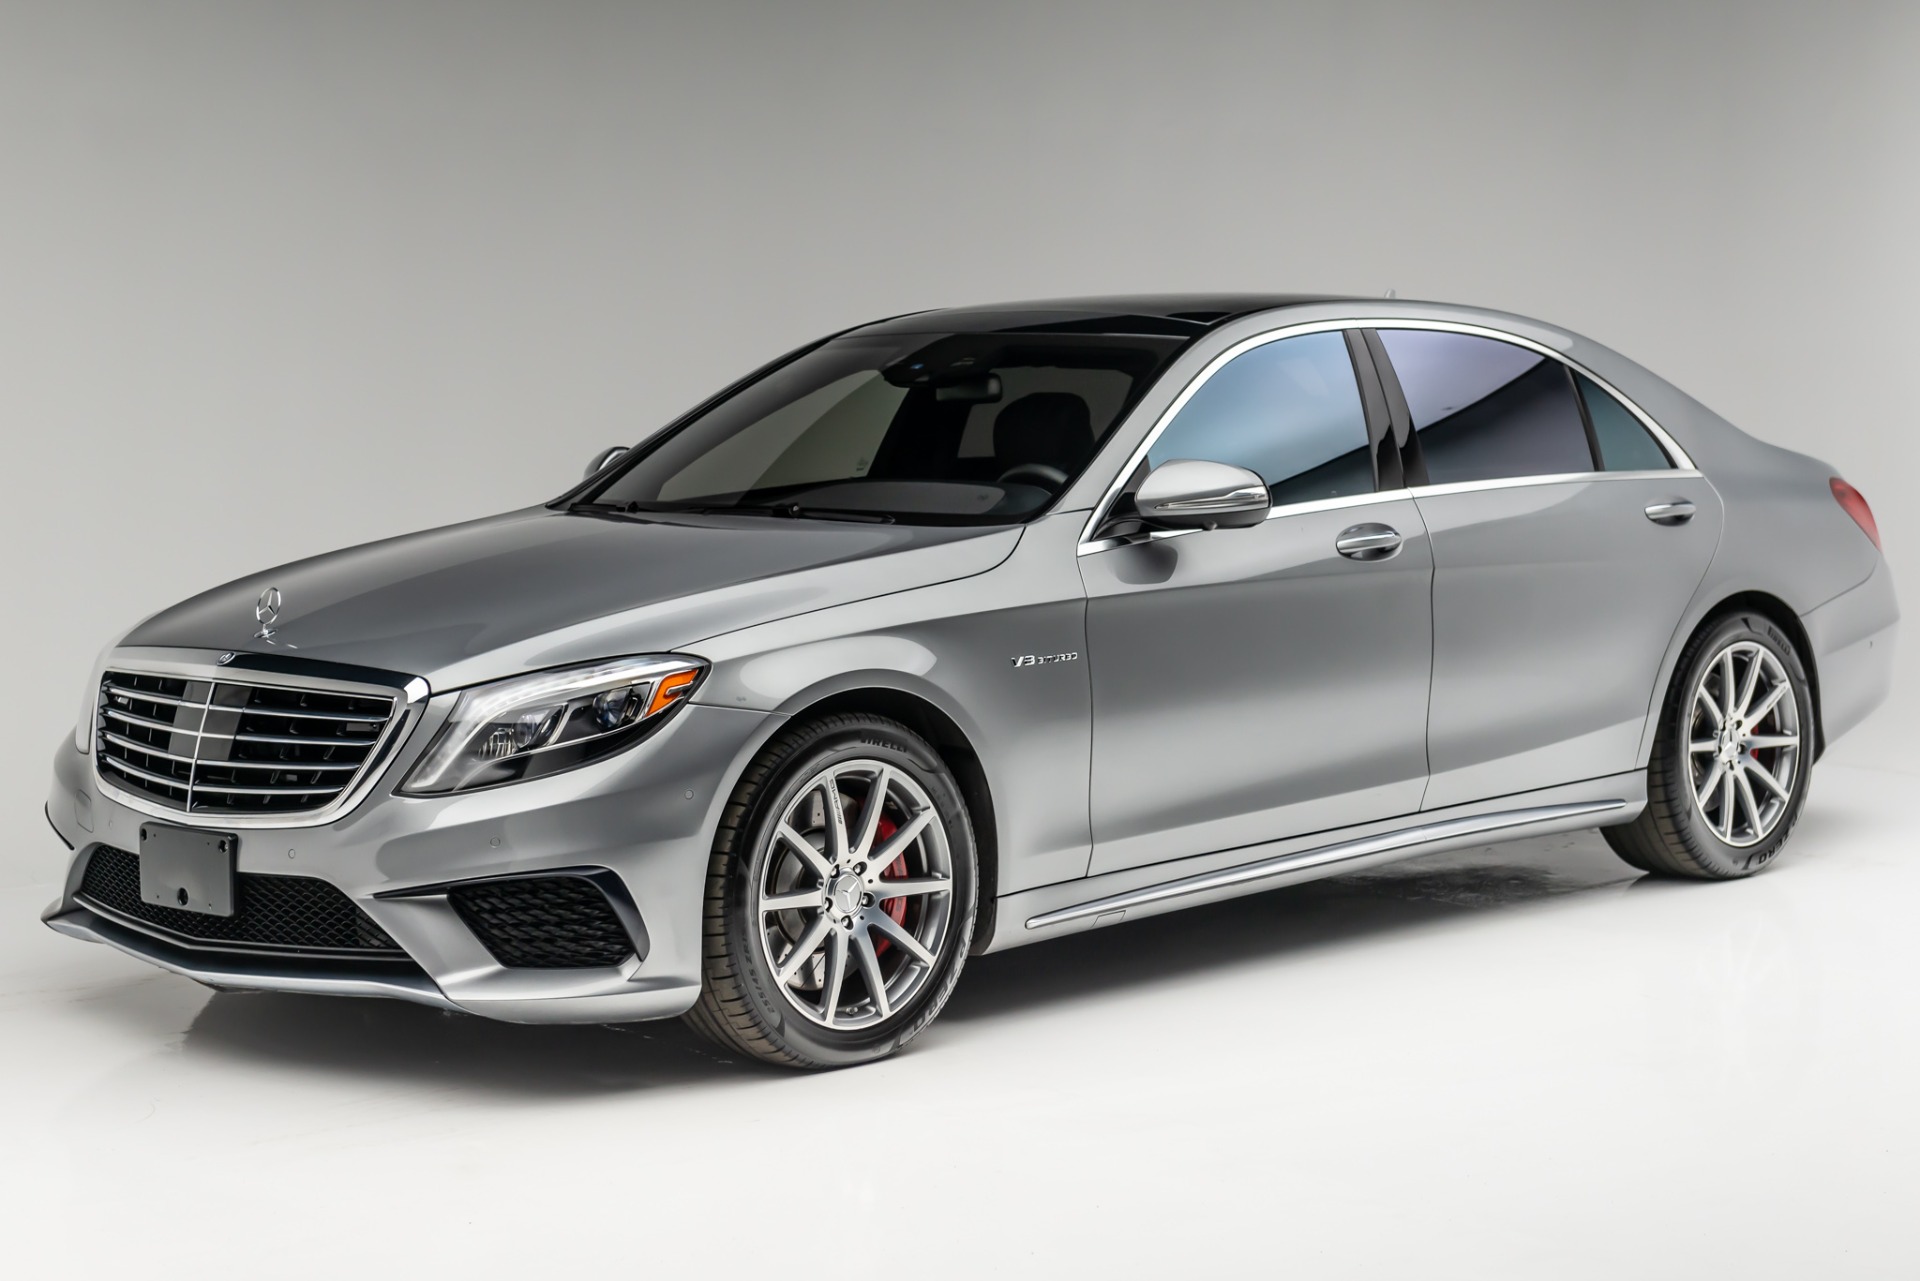 Wald Wants To Turn Your Mercedes C-Class Into An AMG C63 Lookalike